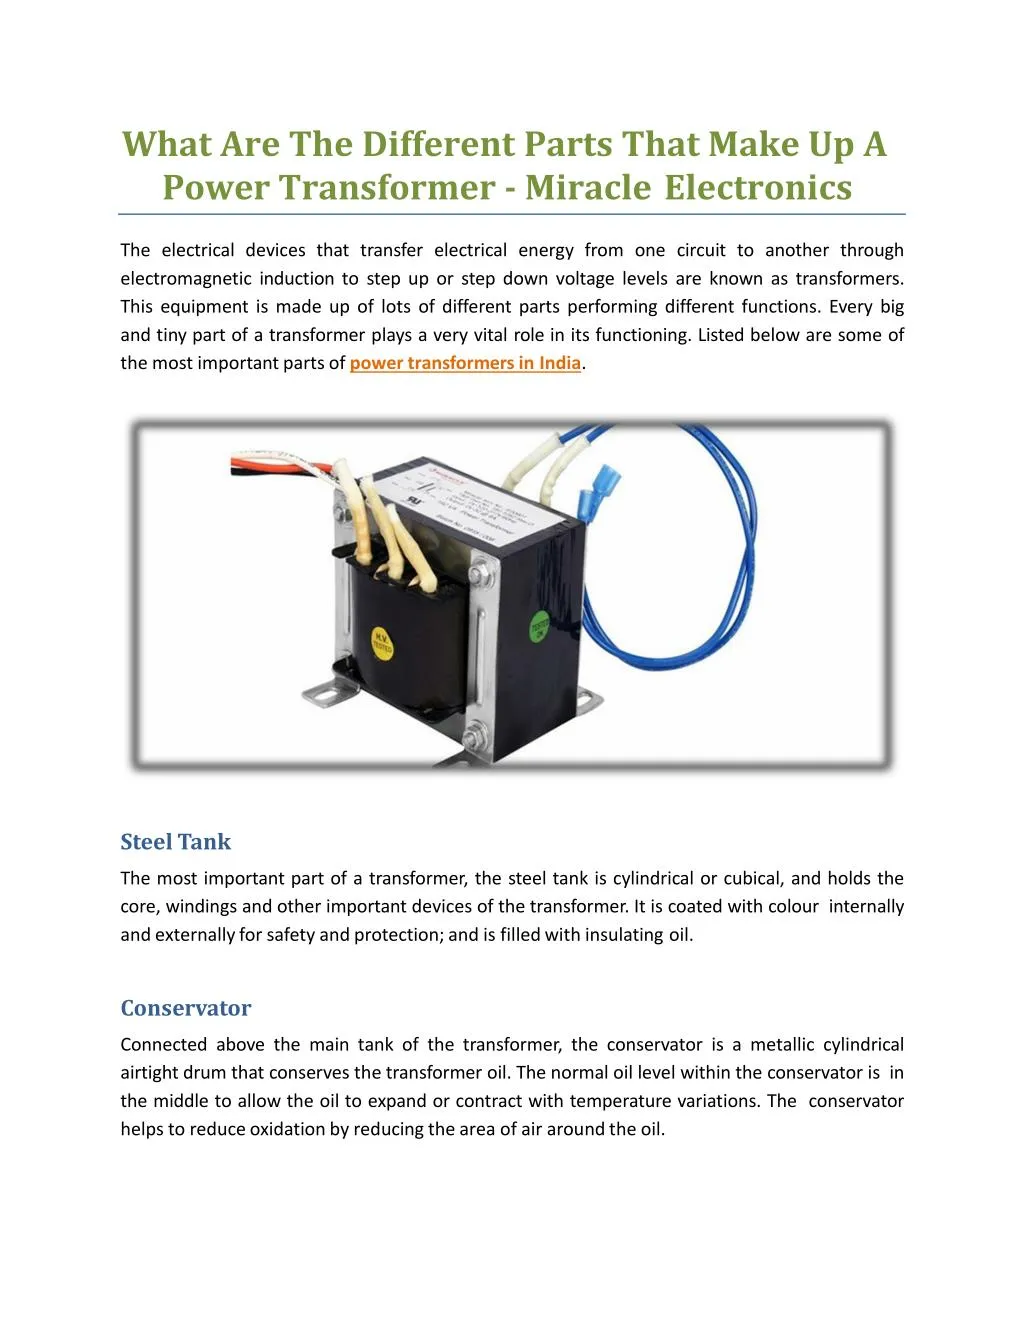 what are the different parts that make up a power transformer miracle electronics